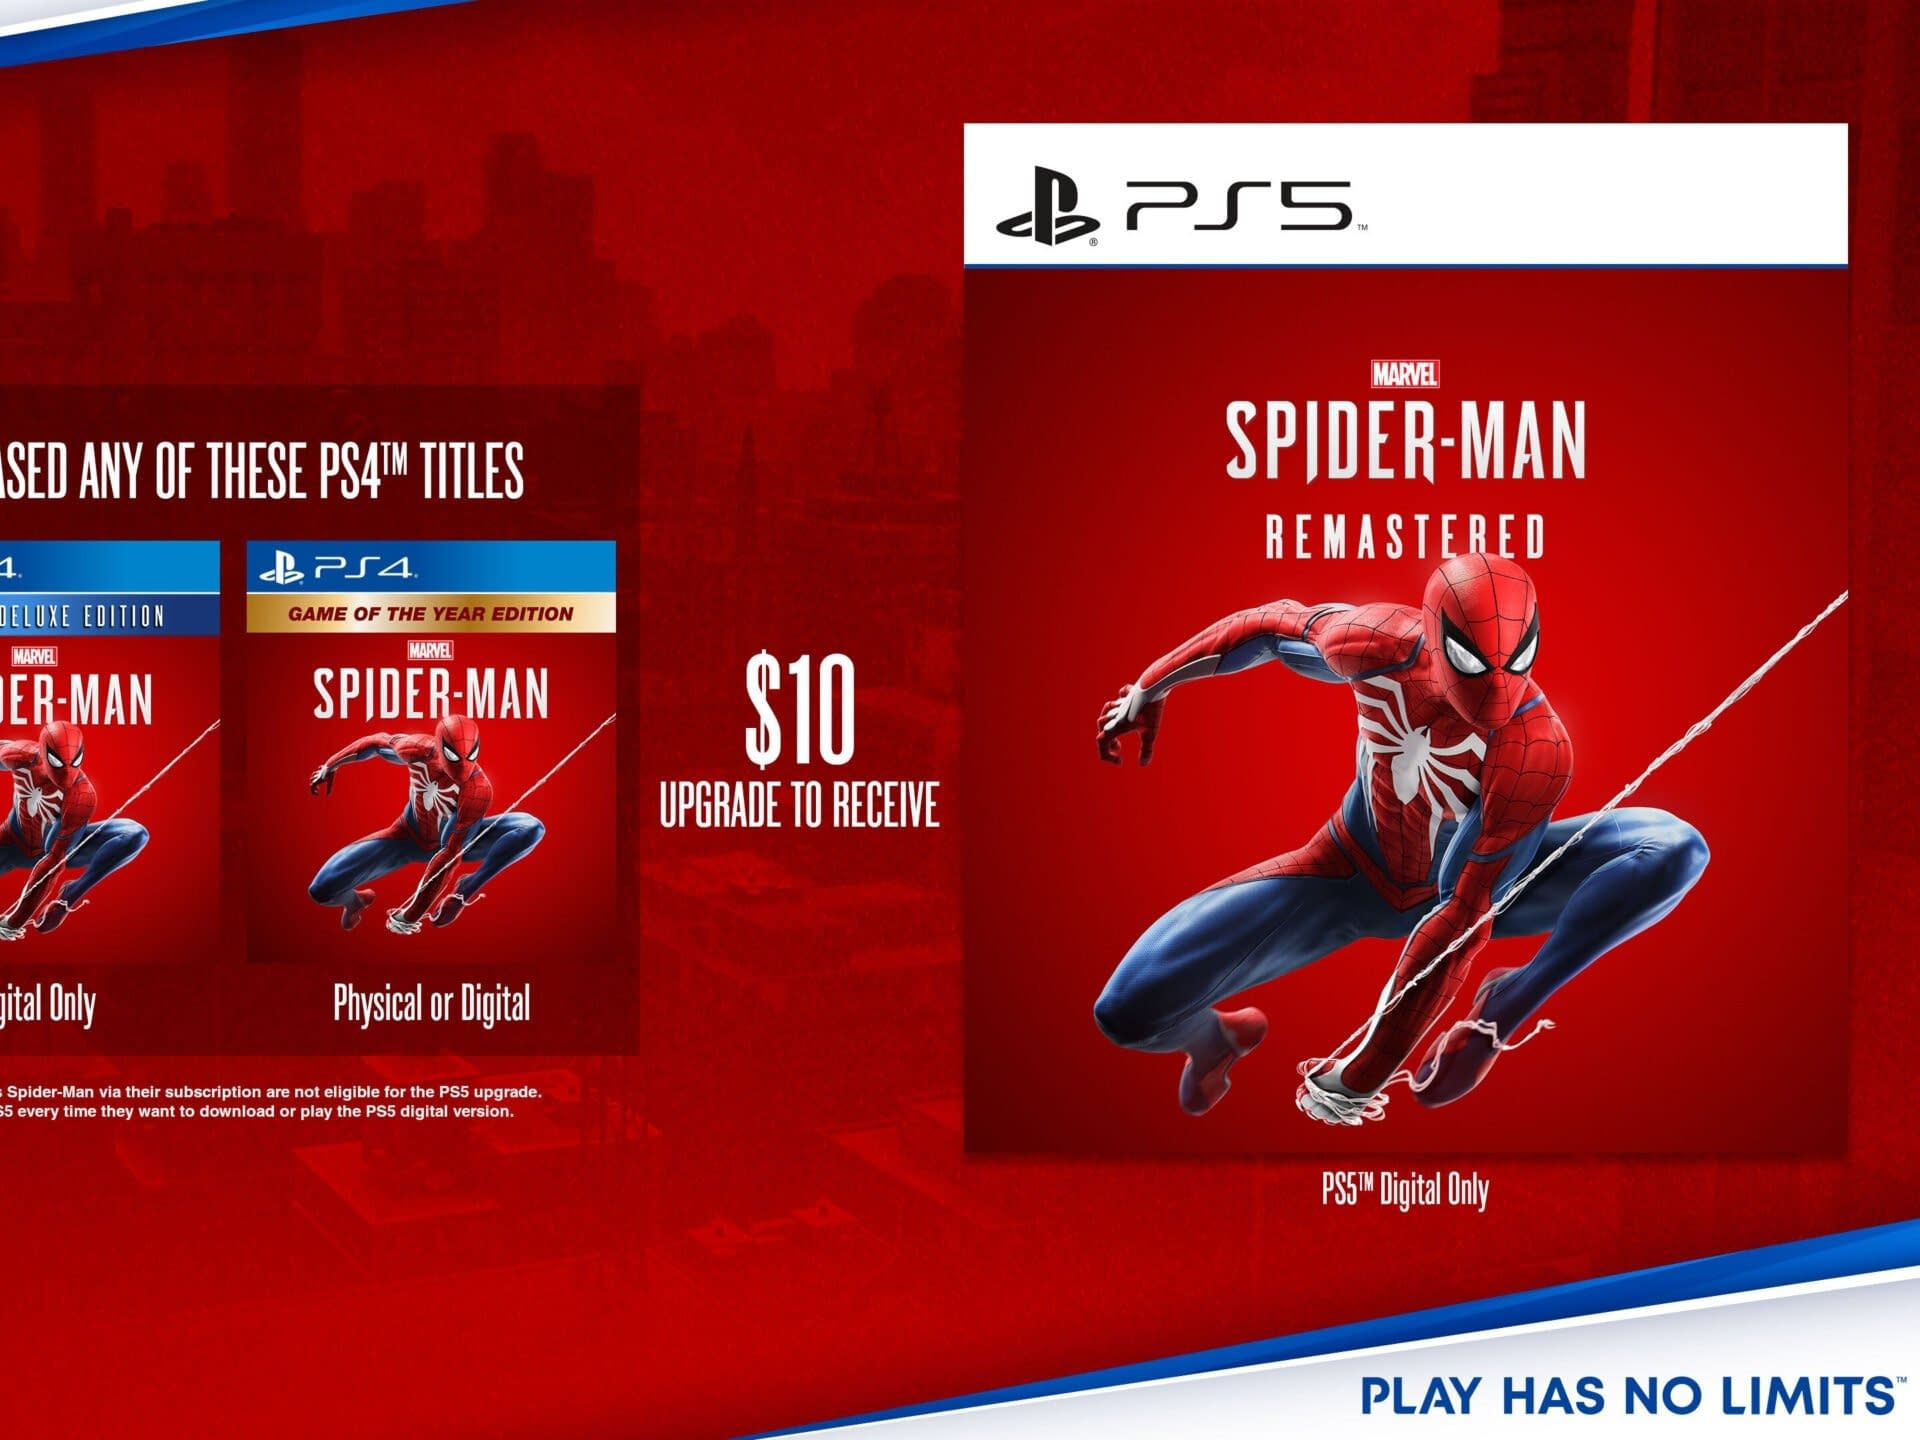 The independent PS5 version of Marvel’s Spider-Man Remastered comes this month!